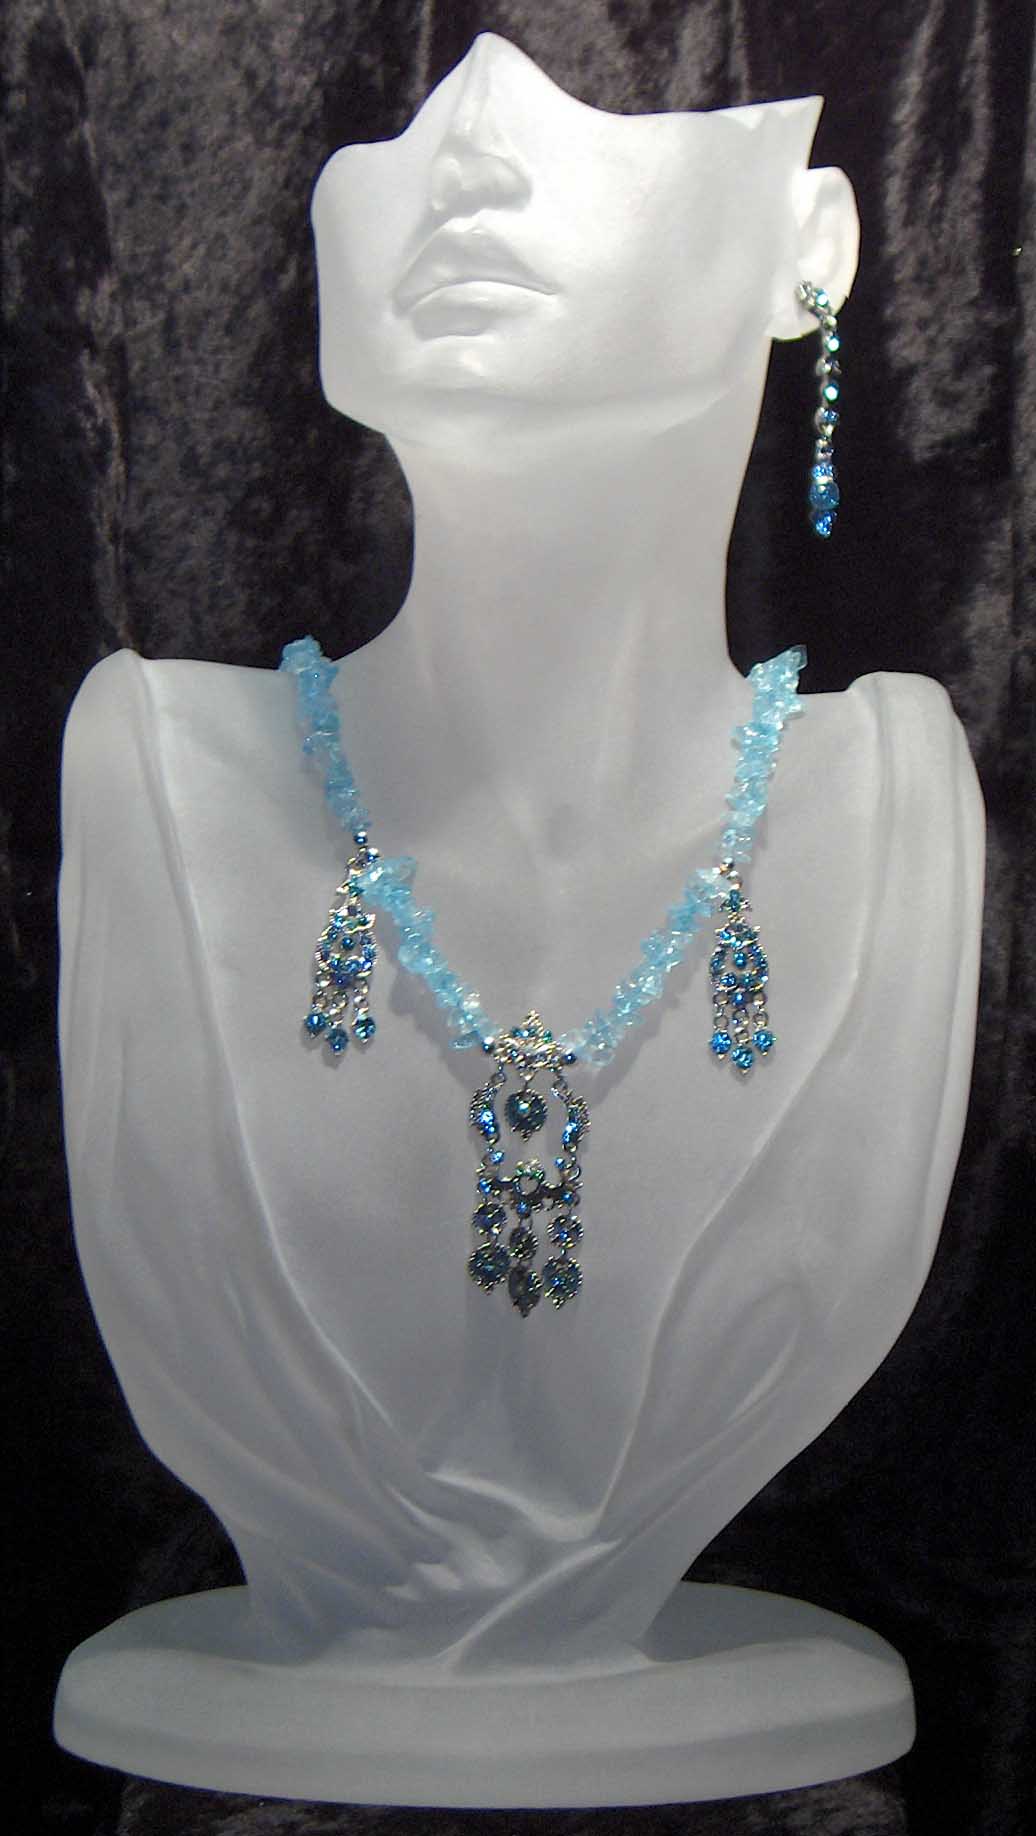 Blue topaz chips with hanging blue crystal pendants